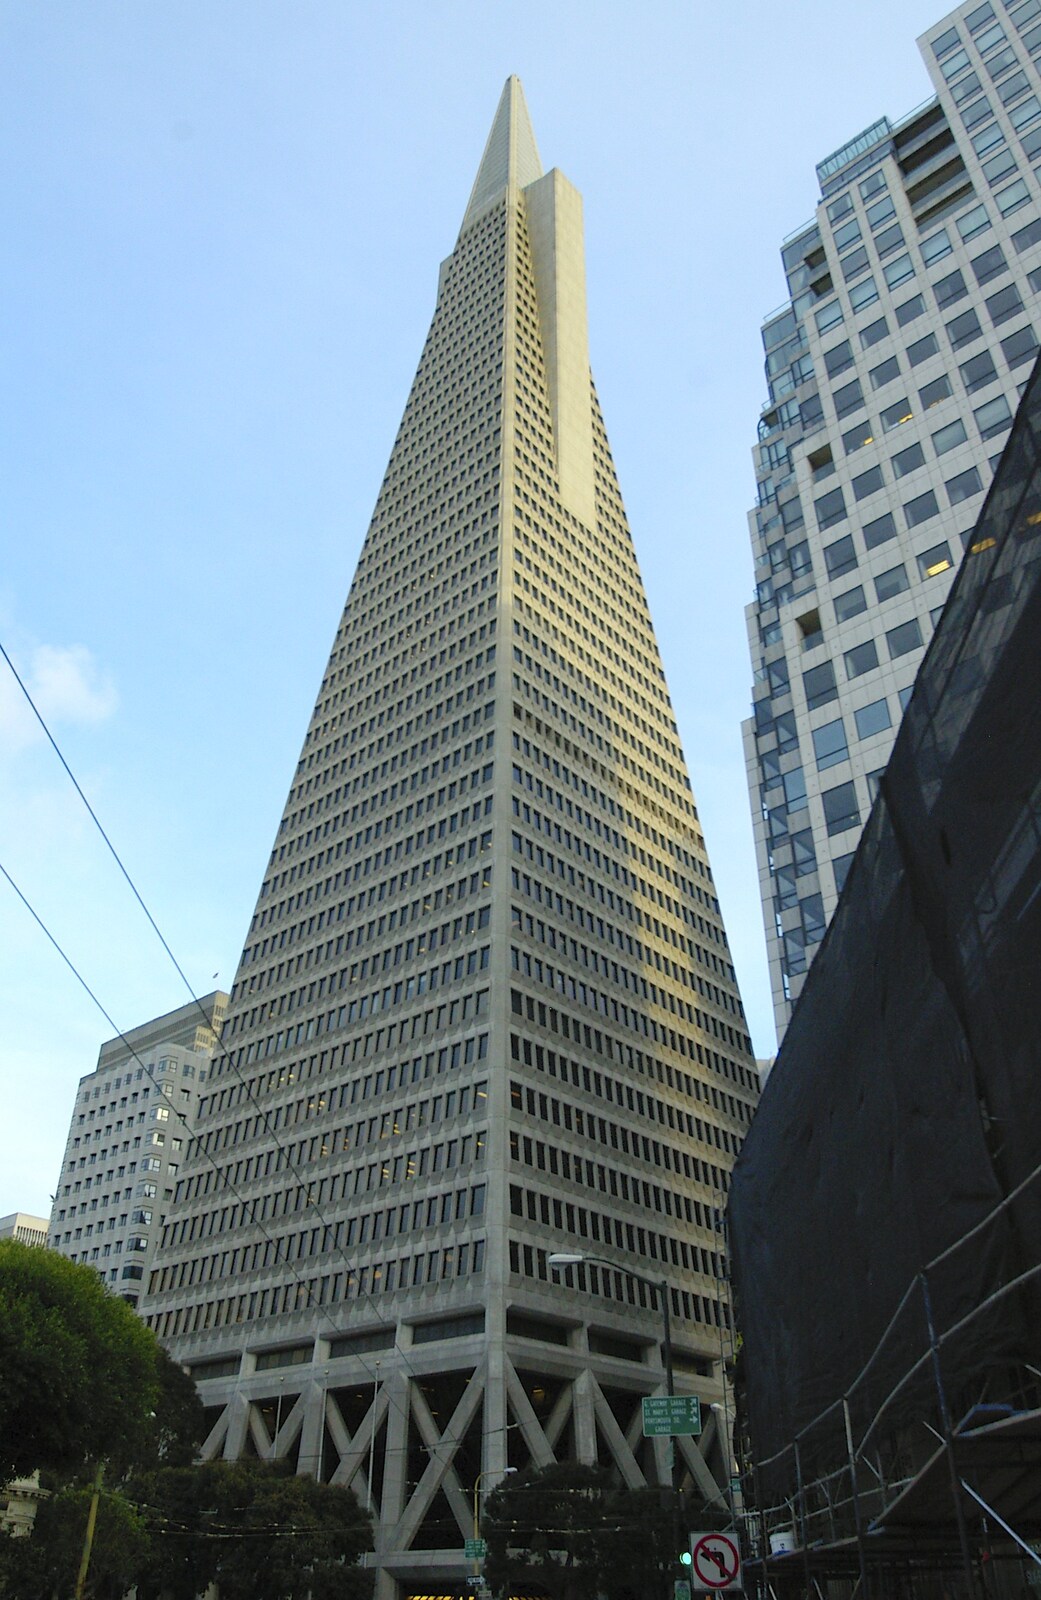 A close-up view of the Transameric building from The Golden Gate Bridge, San Francisco, California, US - 11th March 2006